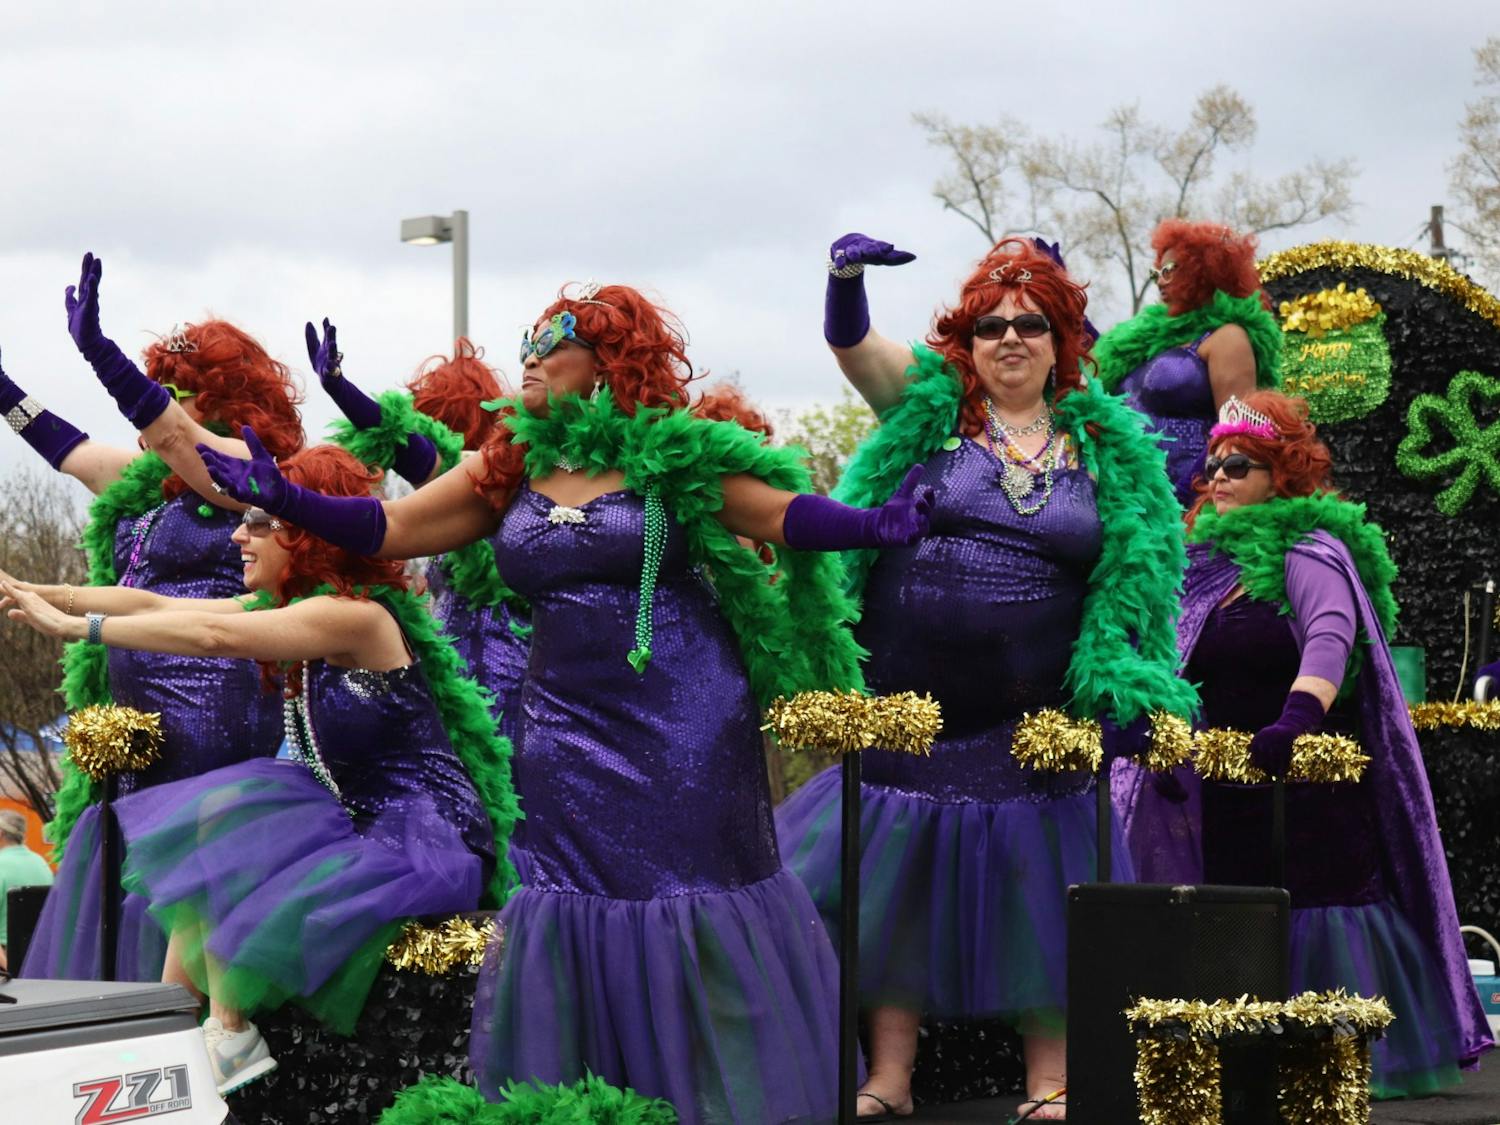 The 40th Annual St. Pats in 5 Points Parade featured the self-declared ‘World Famous Queens of Kudzu’ this past Saturday. The parade was held on March 19, 2022, in celebration of St. Patrick's Day